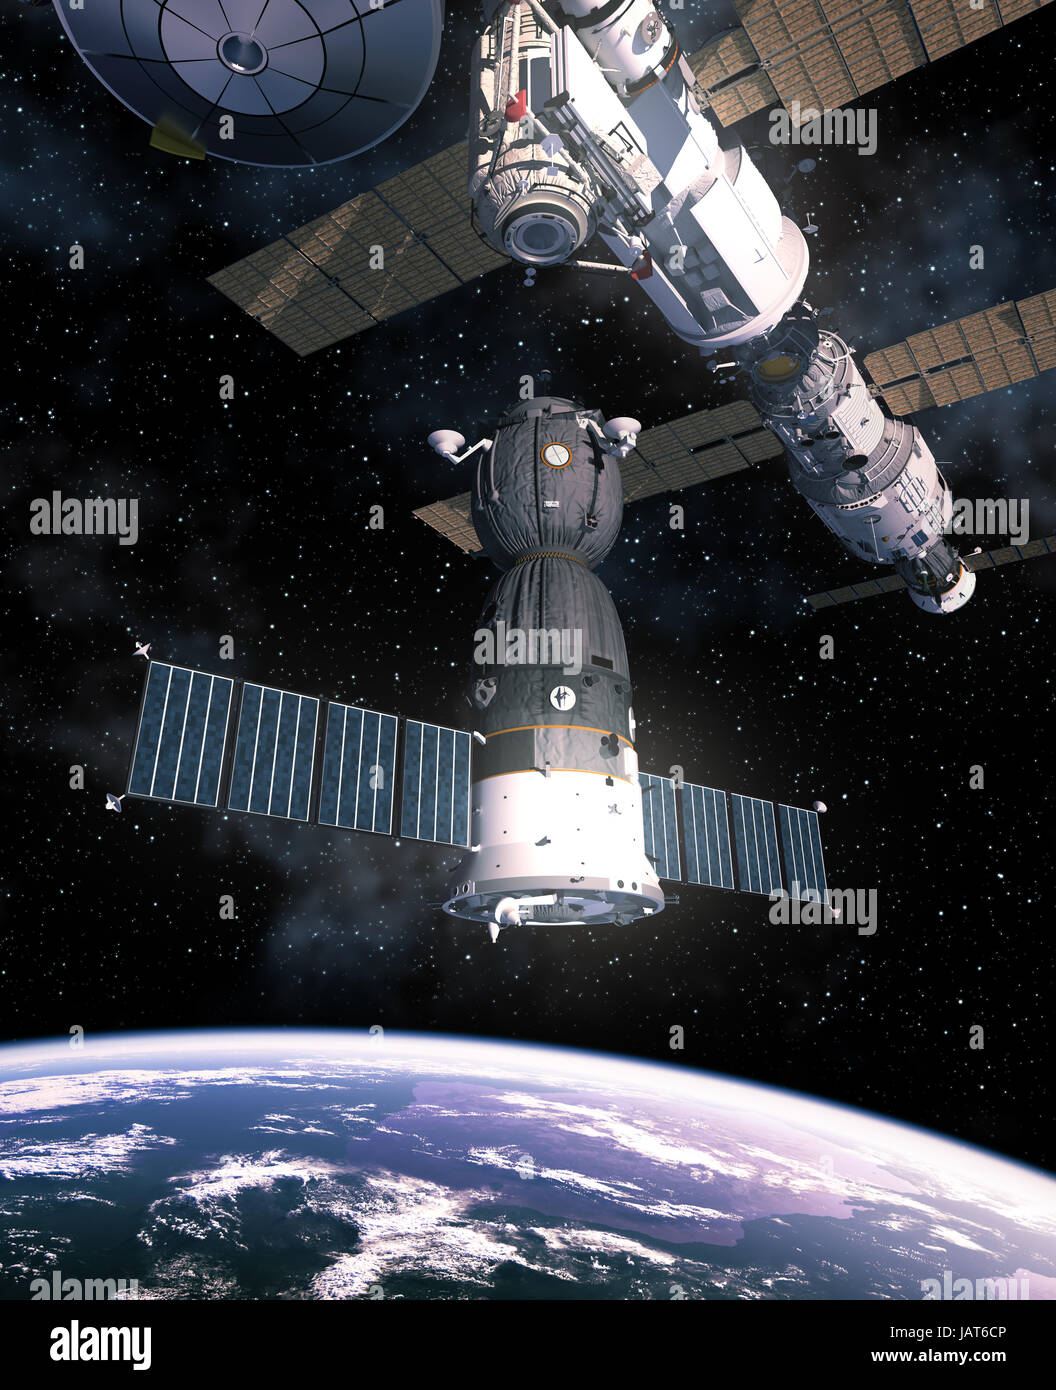 Spacecraft Is Preparing To Dock With International Space Station. 3D Illustration. Stock Photo